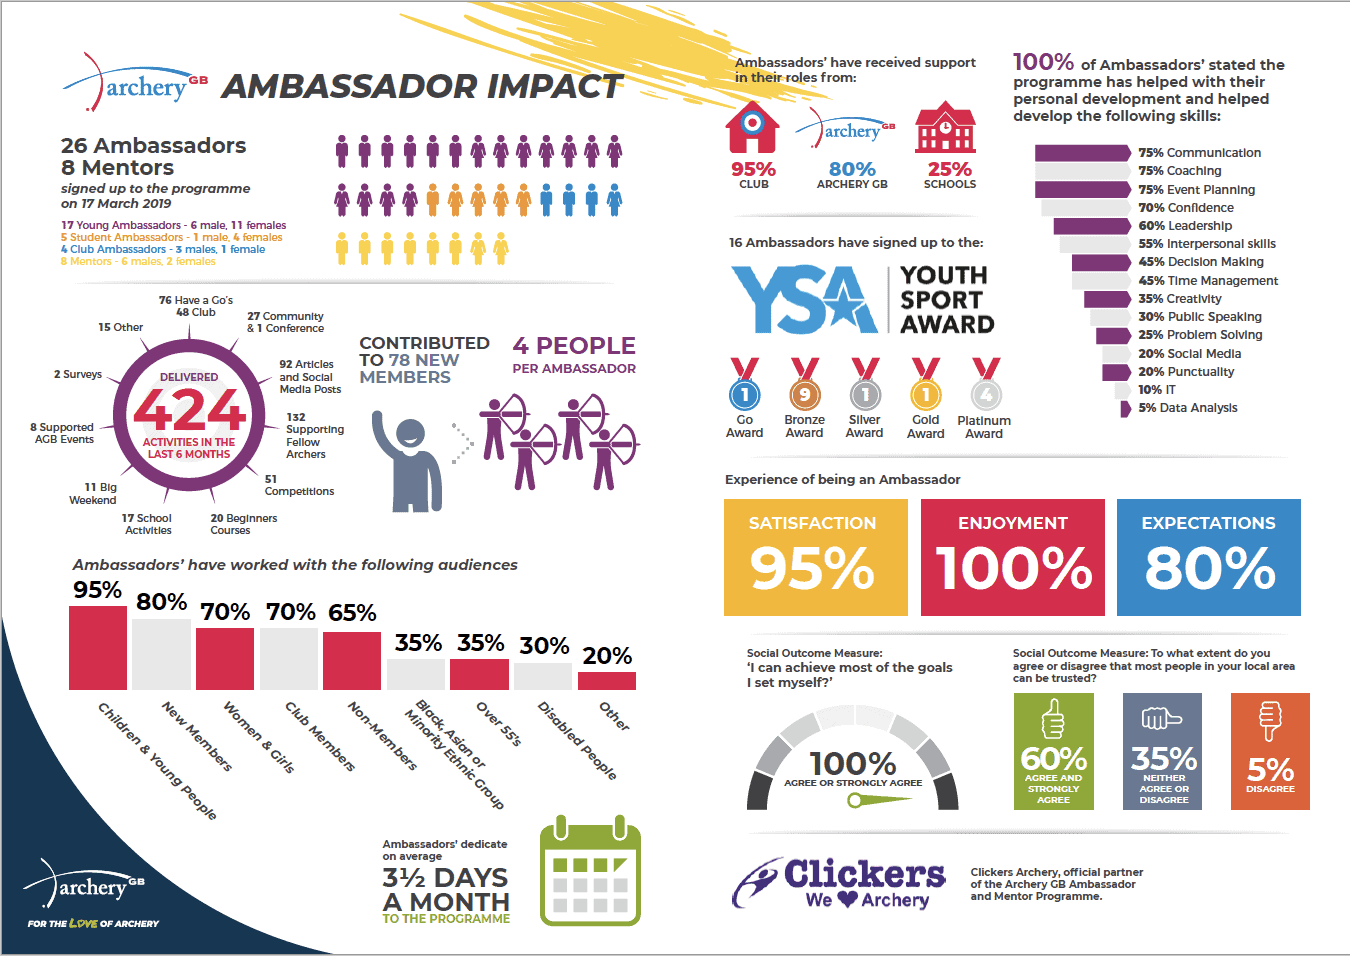 What does it mean to be an Ambassador?